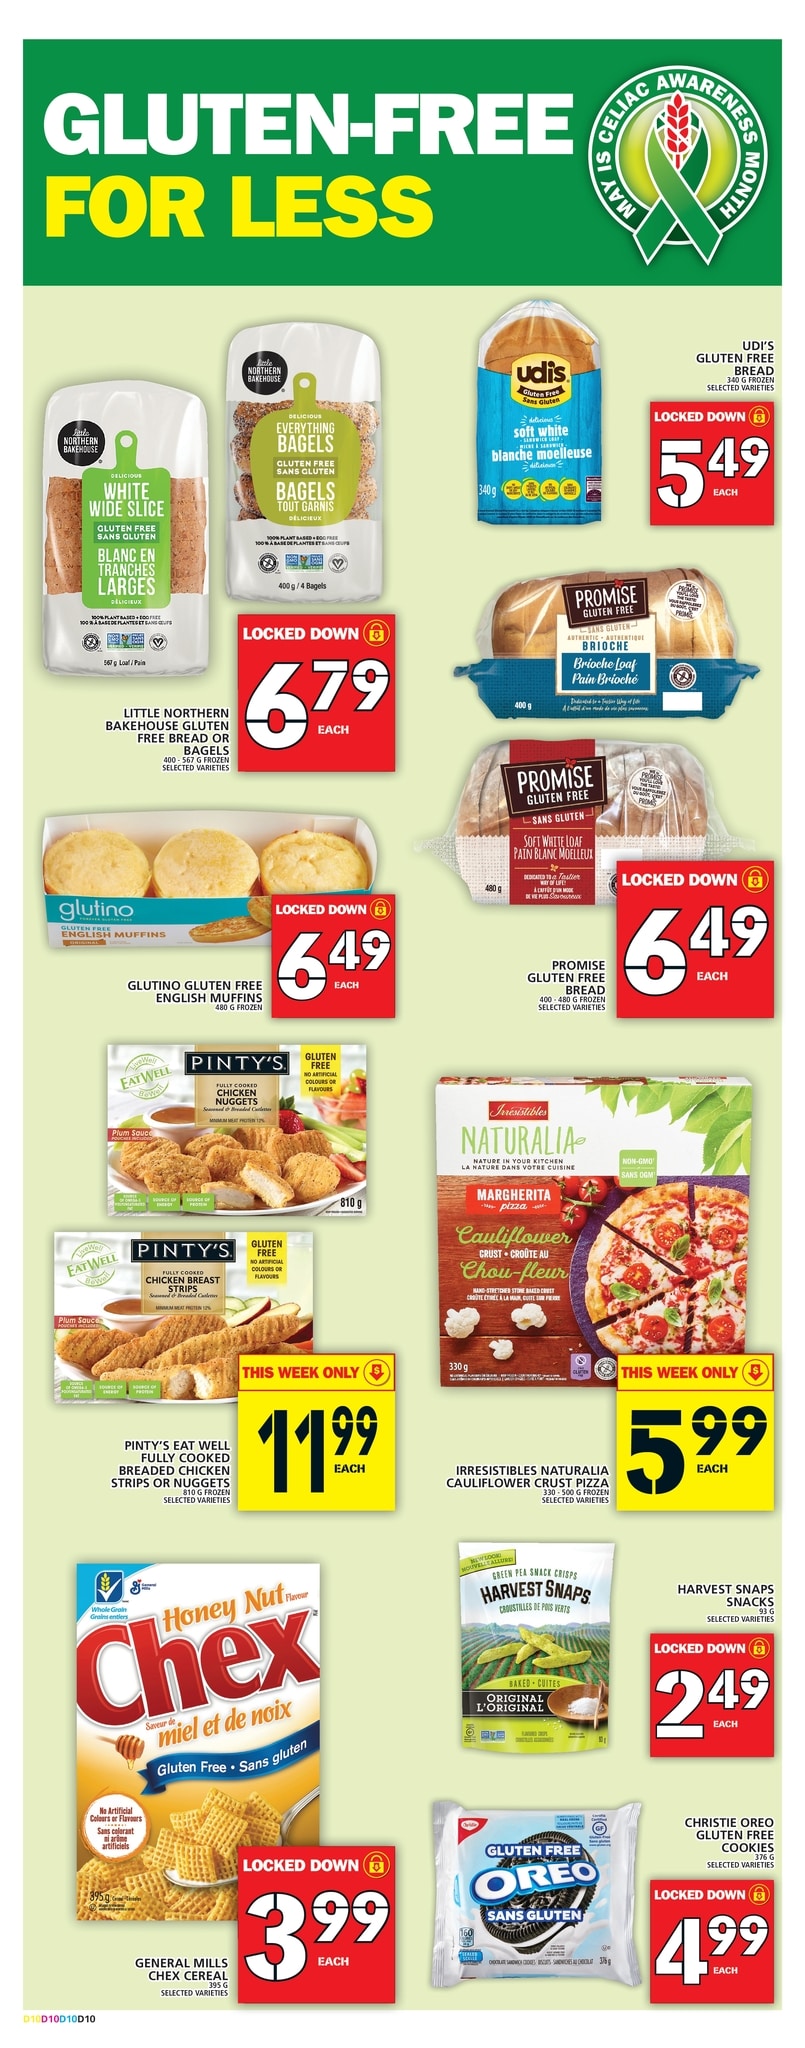 Food Basics - Weekly Flyer Specials - Page 13